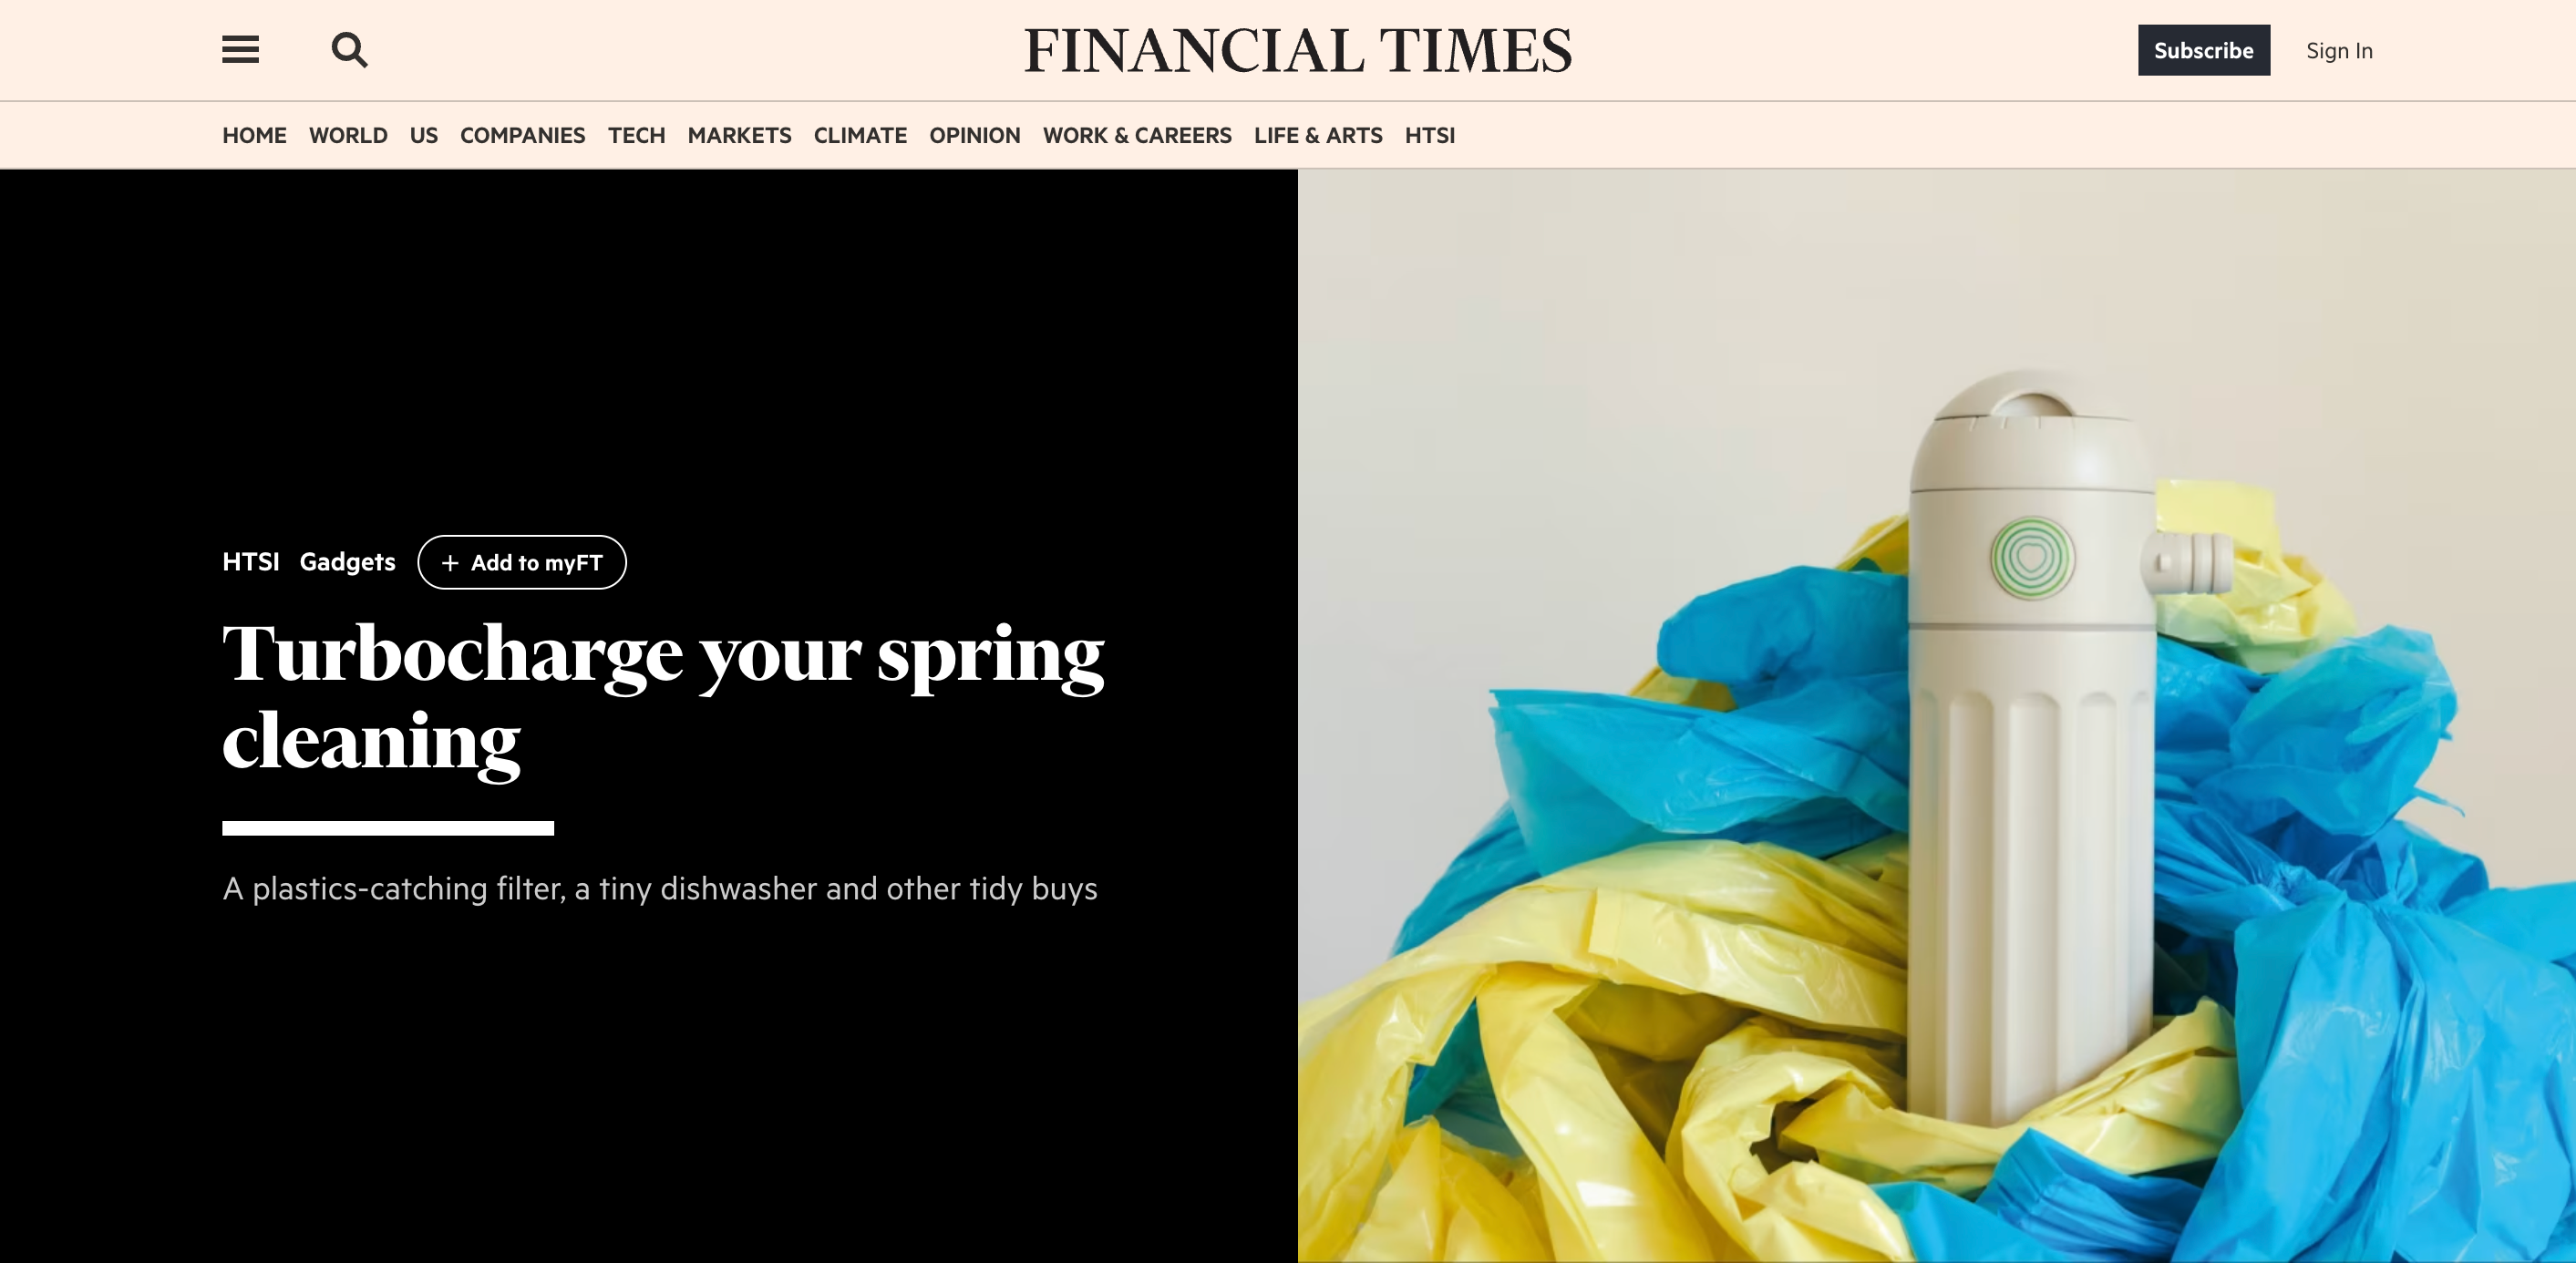 Financial Times: Turbocharge your spring cleaning